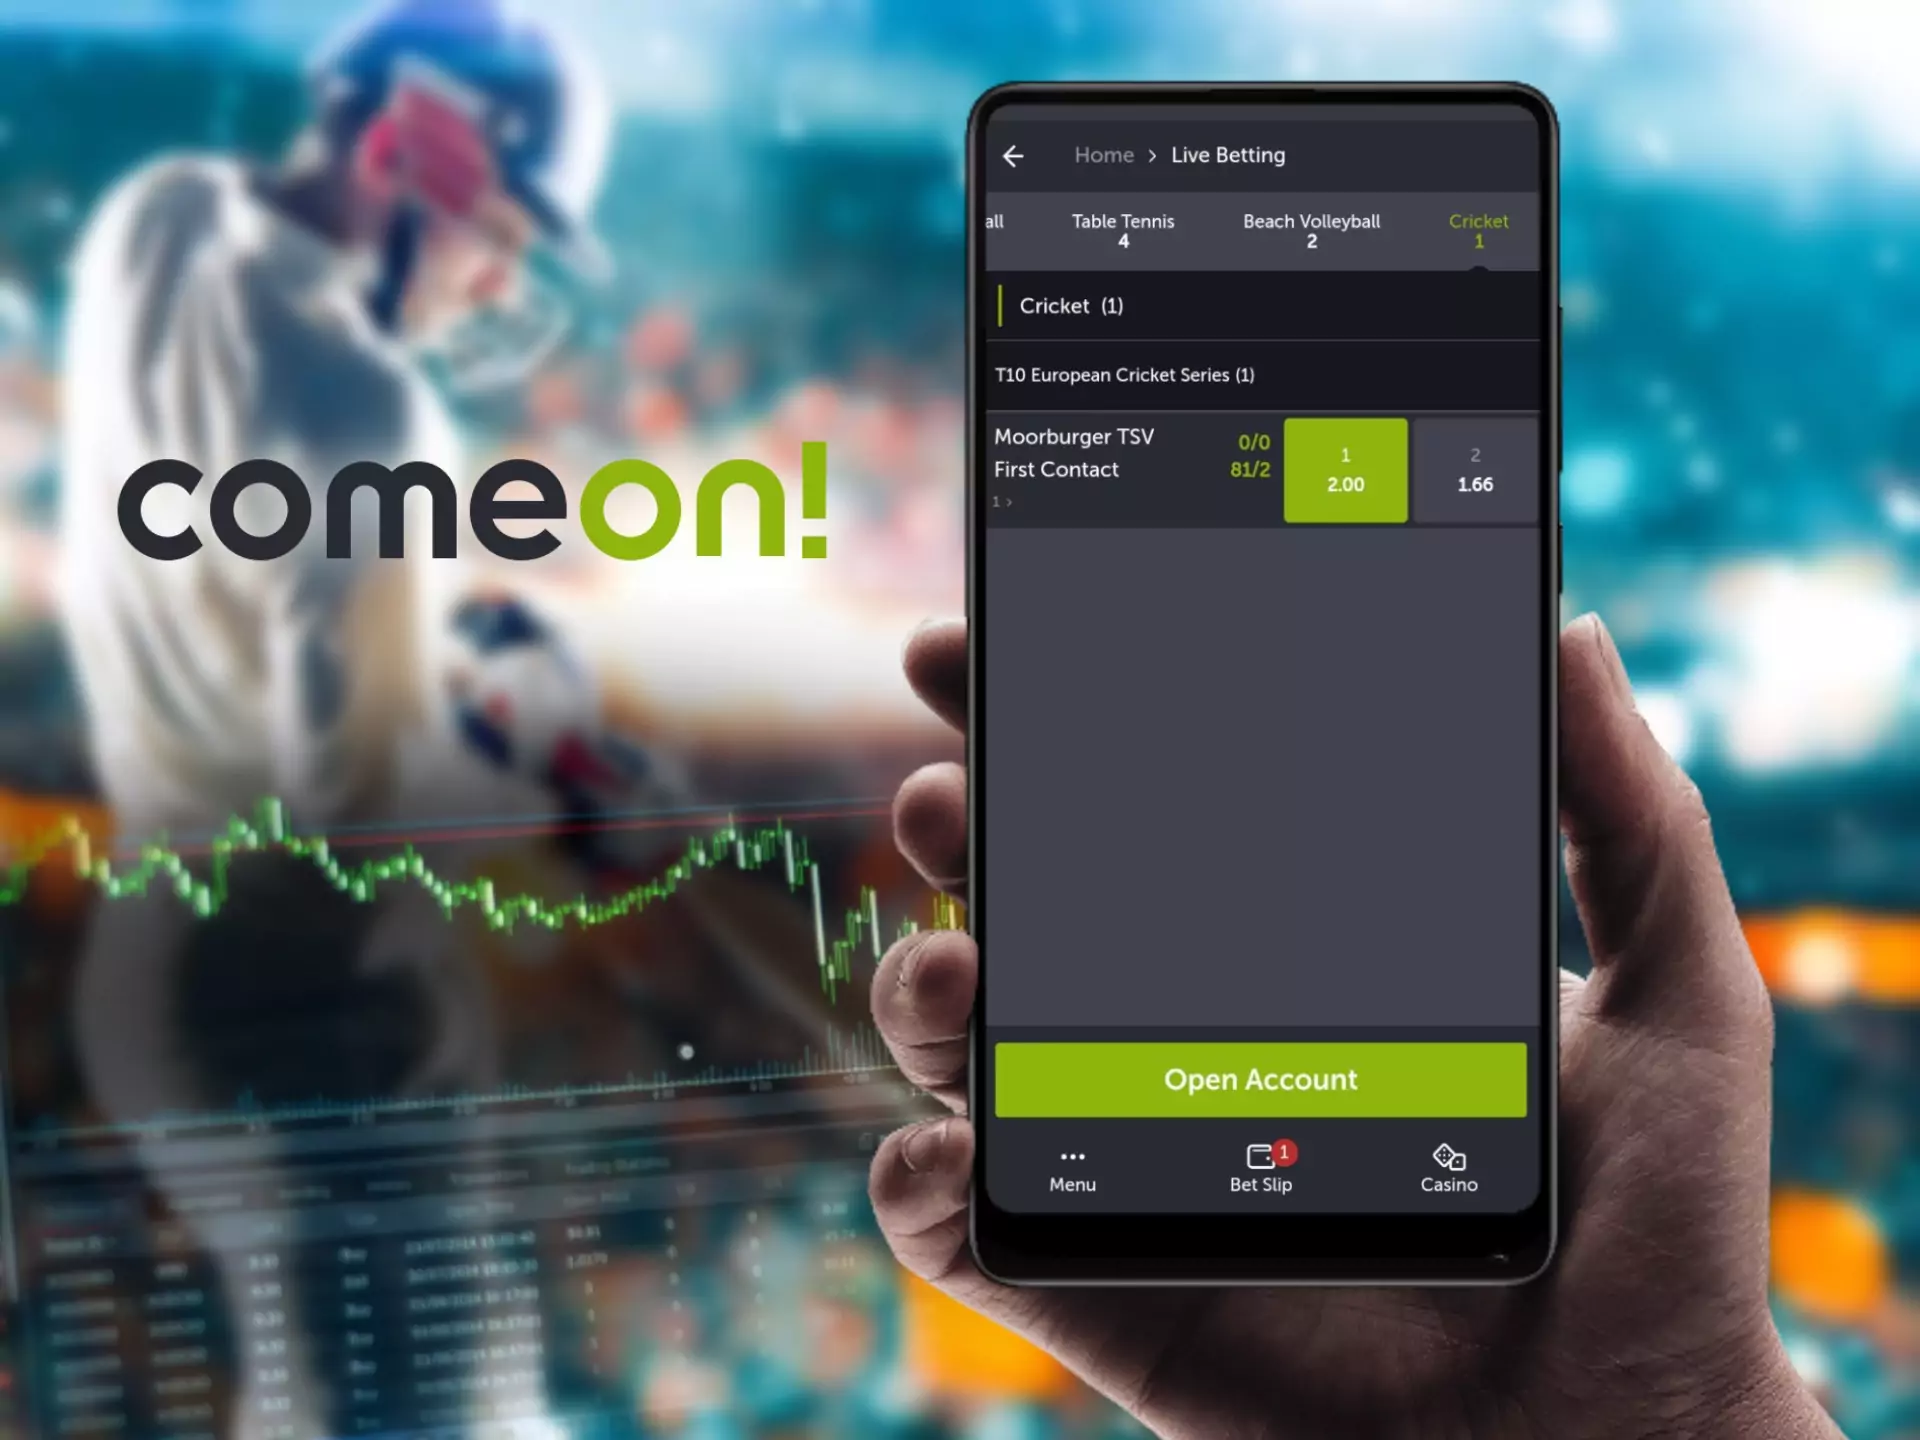 You'll find a lot of sport markets and profitable odds at ComeOn sportsbook.